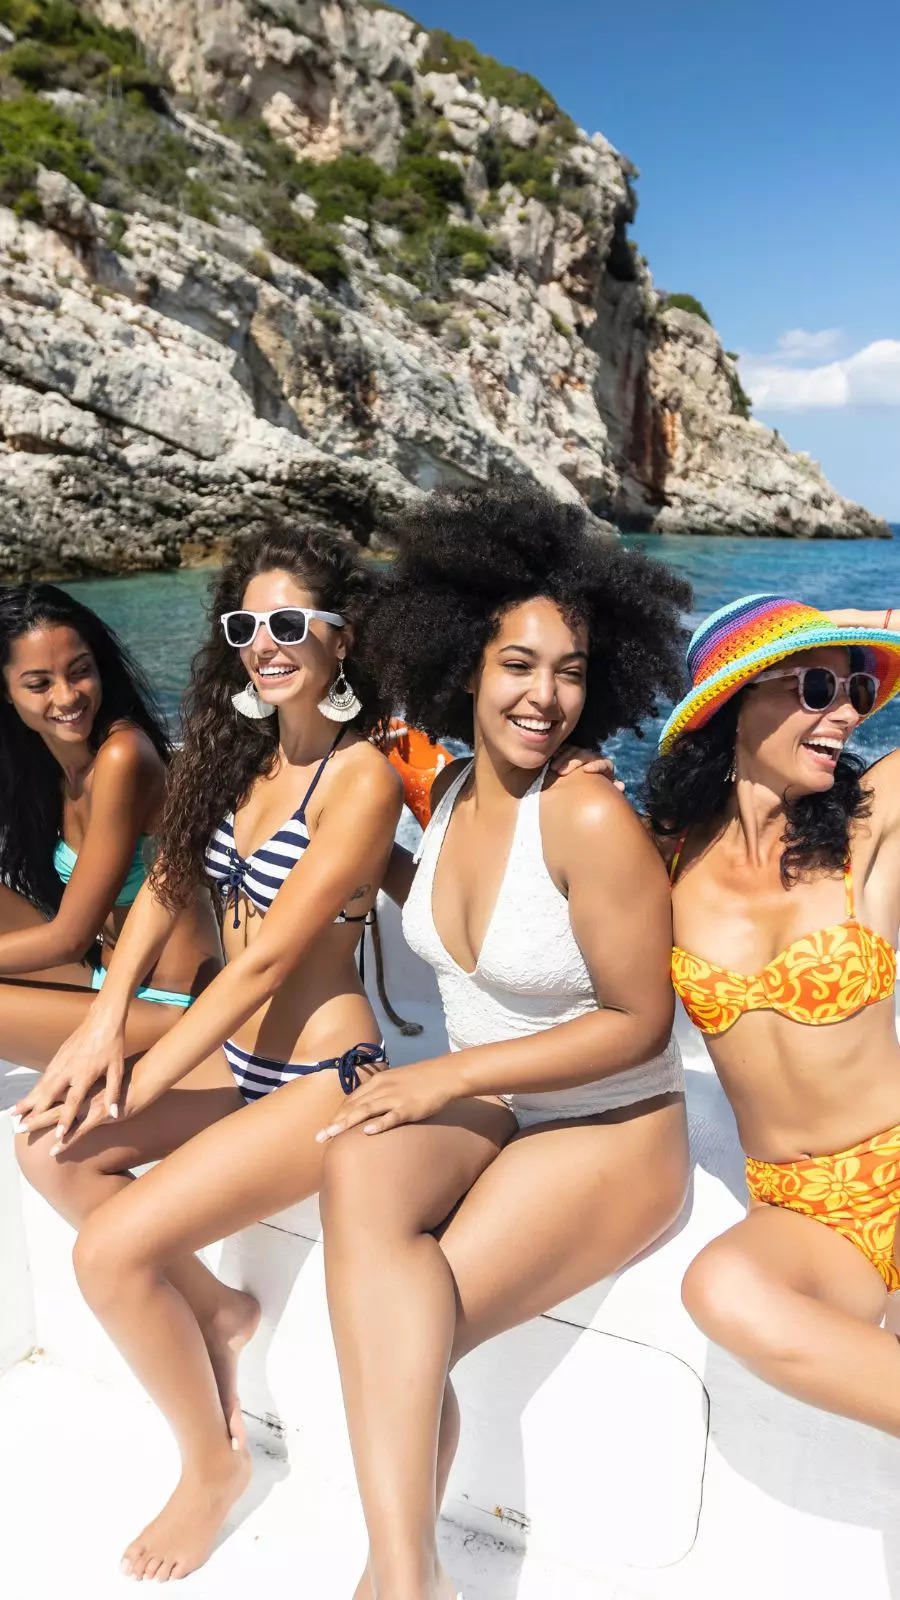 Breathtaking countries you can safely visit with your girl gang